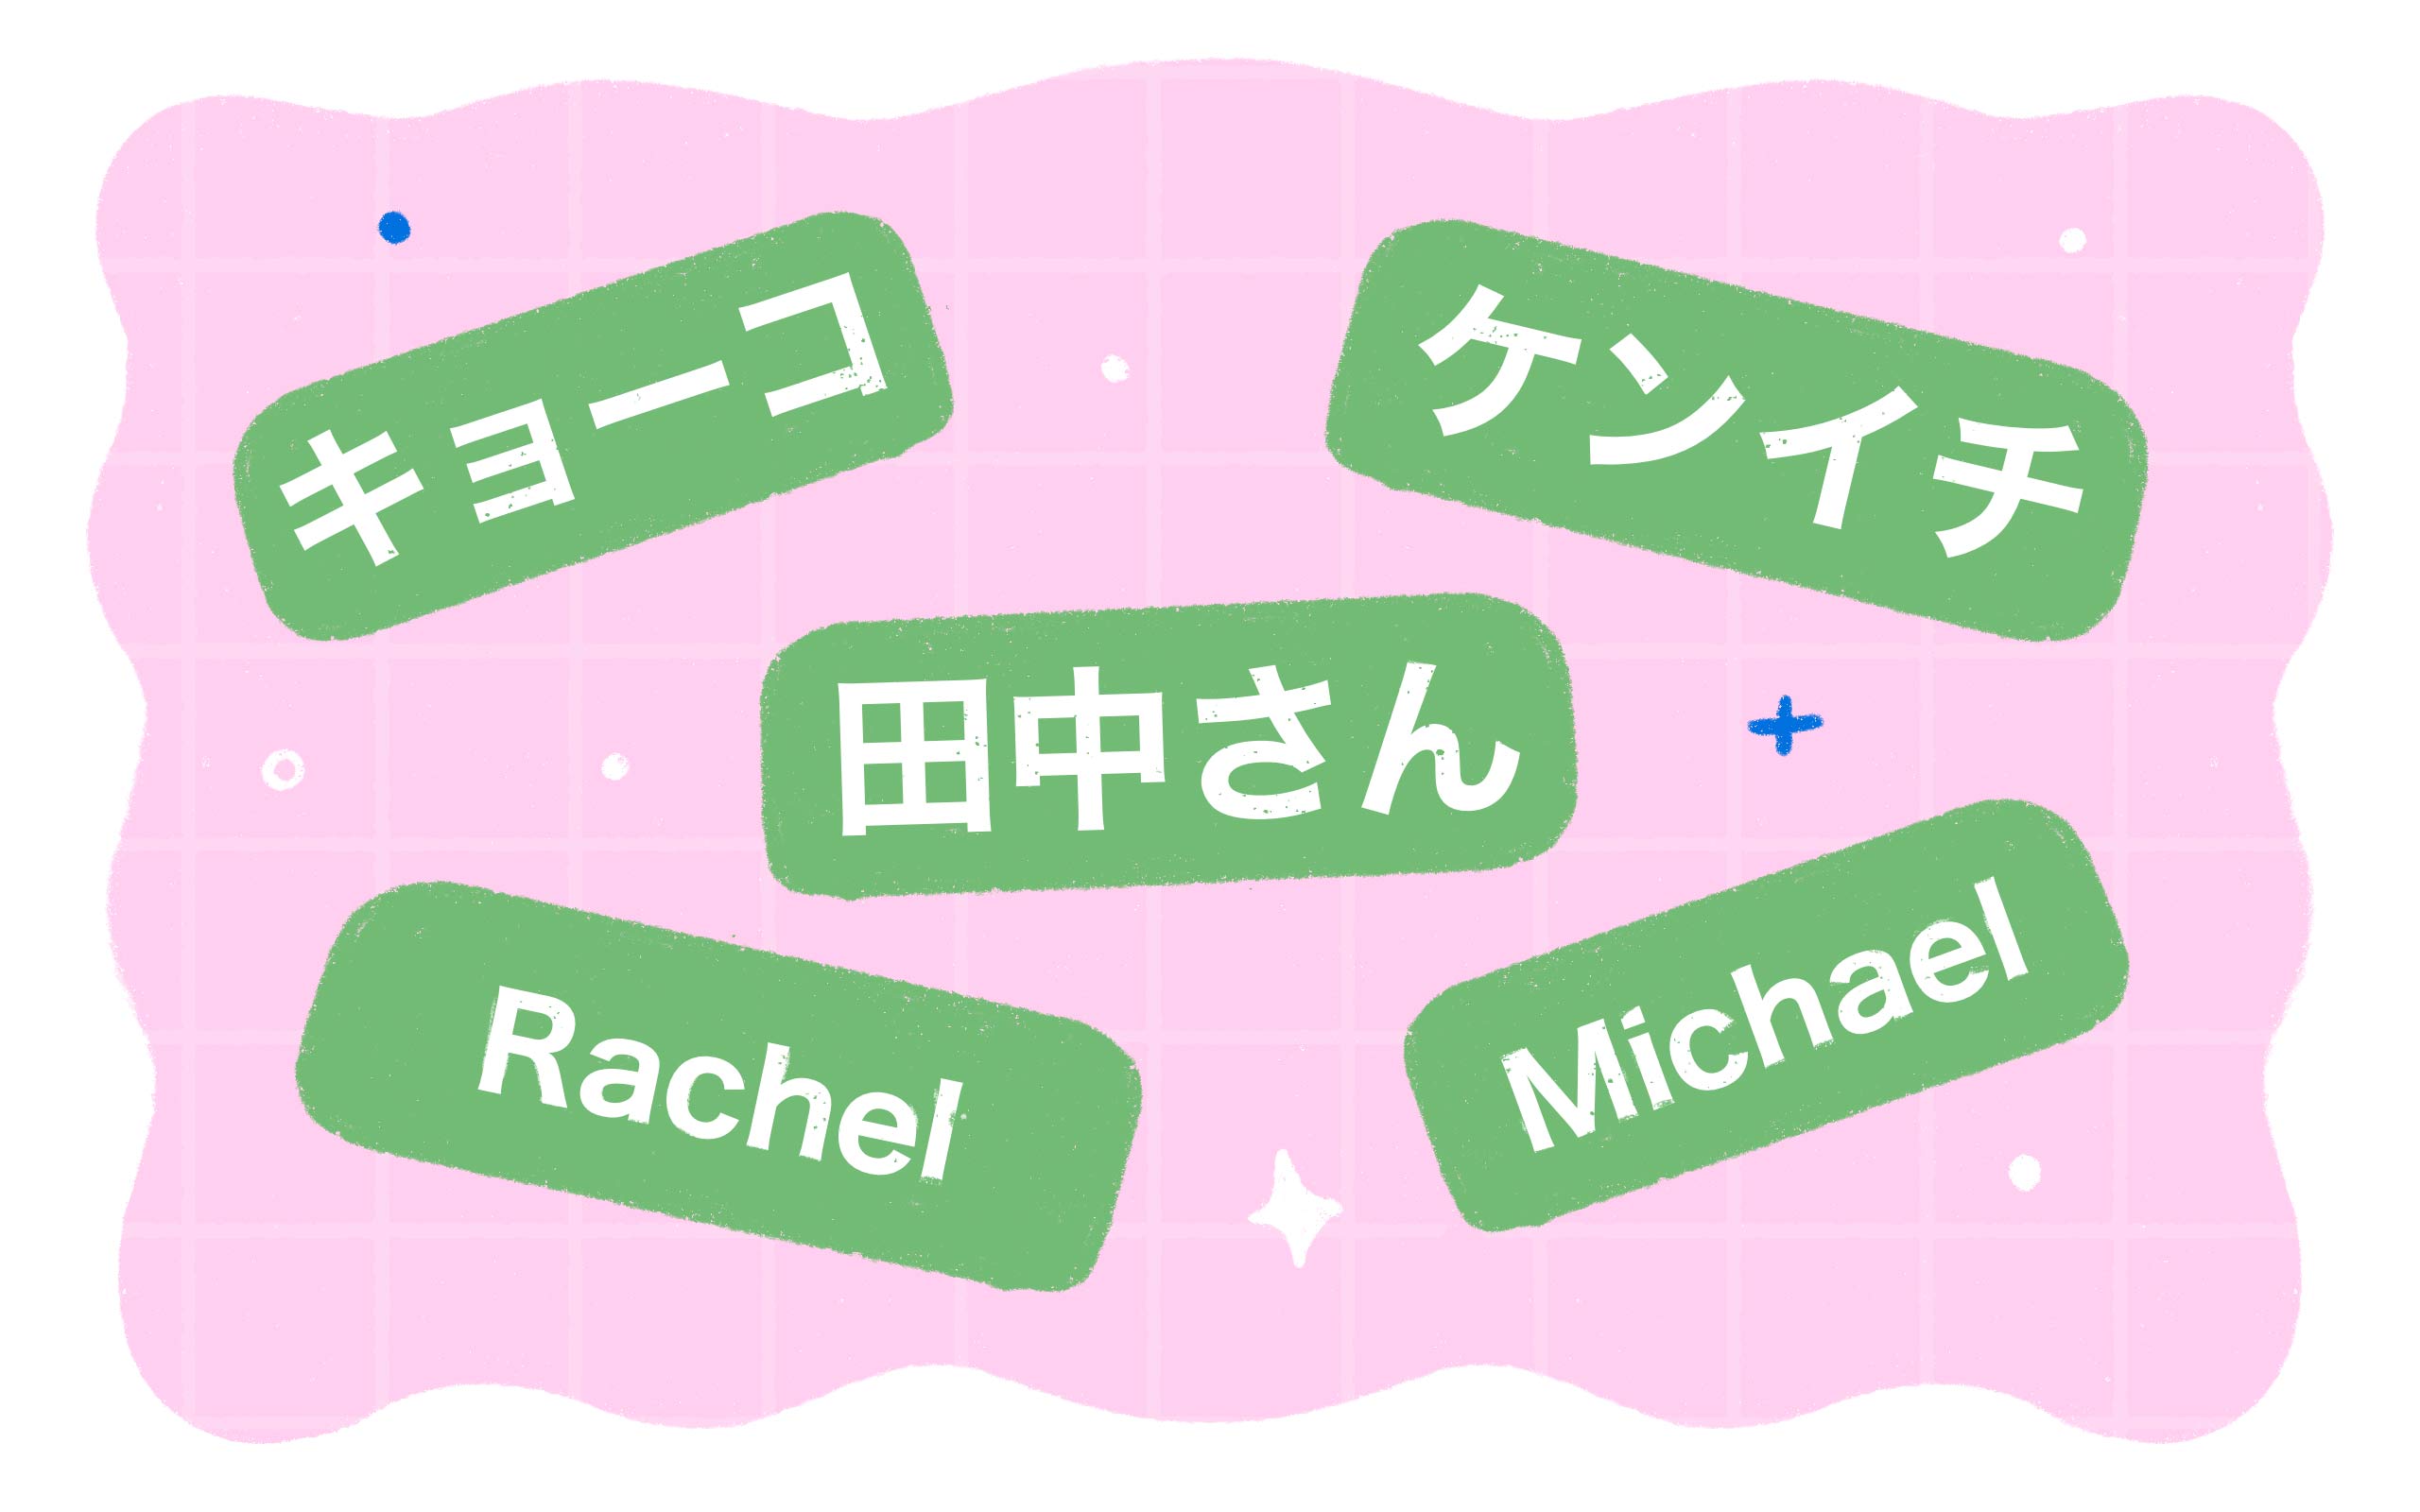 examples of names such as キョーコ, ケンイチ, 田中さん, Rachel and Michael